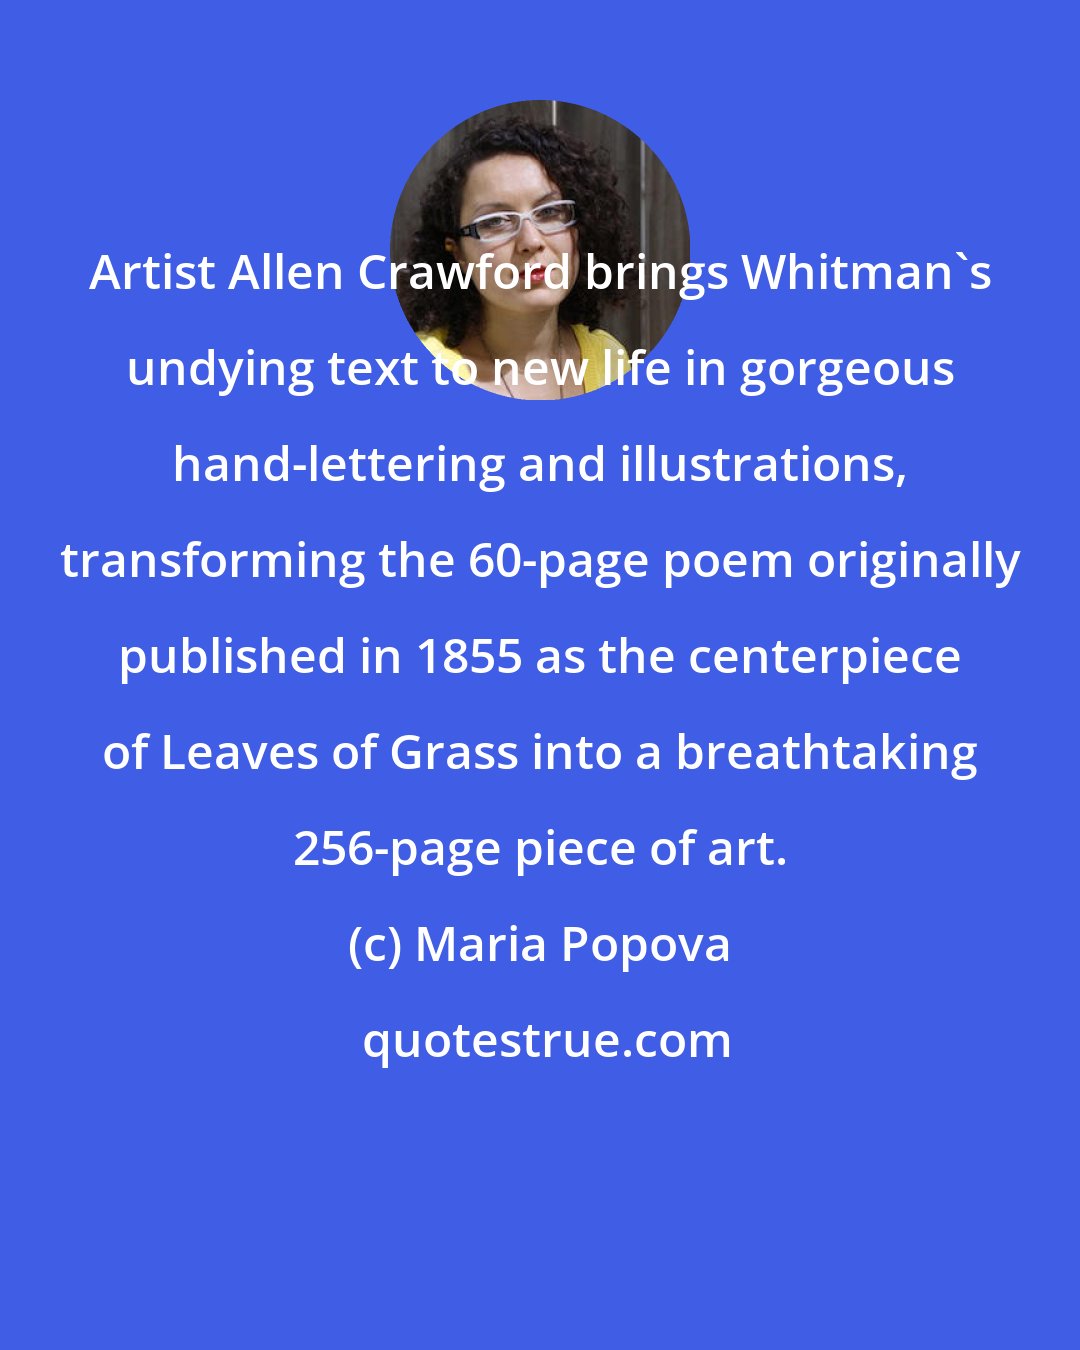 Maria Popova: Artist Allen Crawford brings Whitman's undying text to new life in gorgeous hand-lettering and illustrations, transforming the 60-page poem originally published in 1855 as the centerpiece of Leaves of Grass into a breathtaking 256-page piece of art.